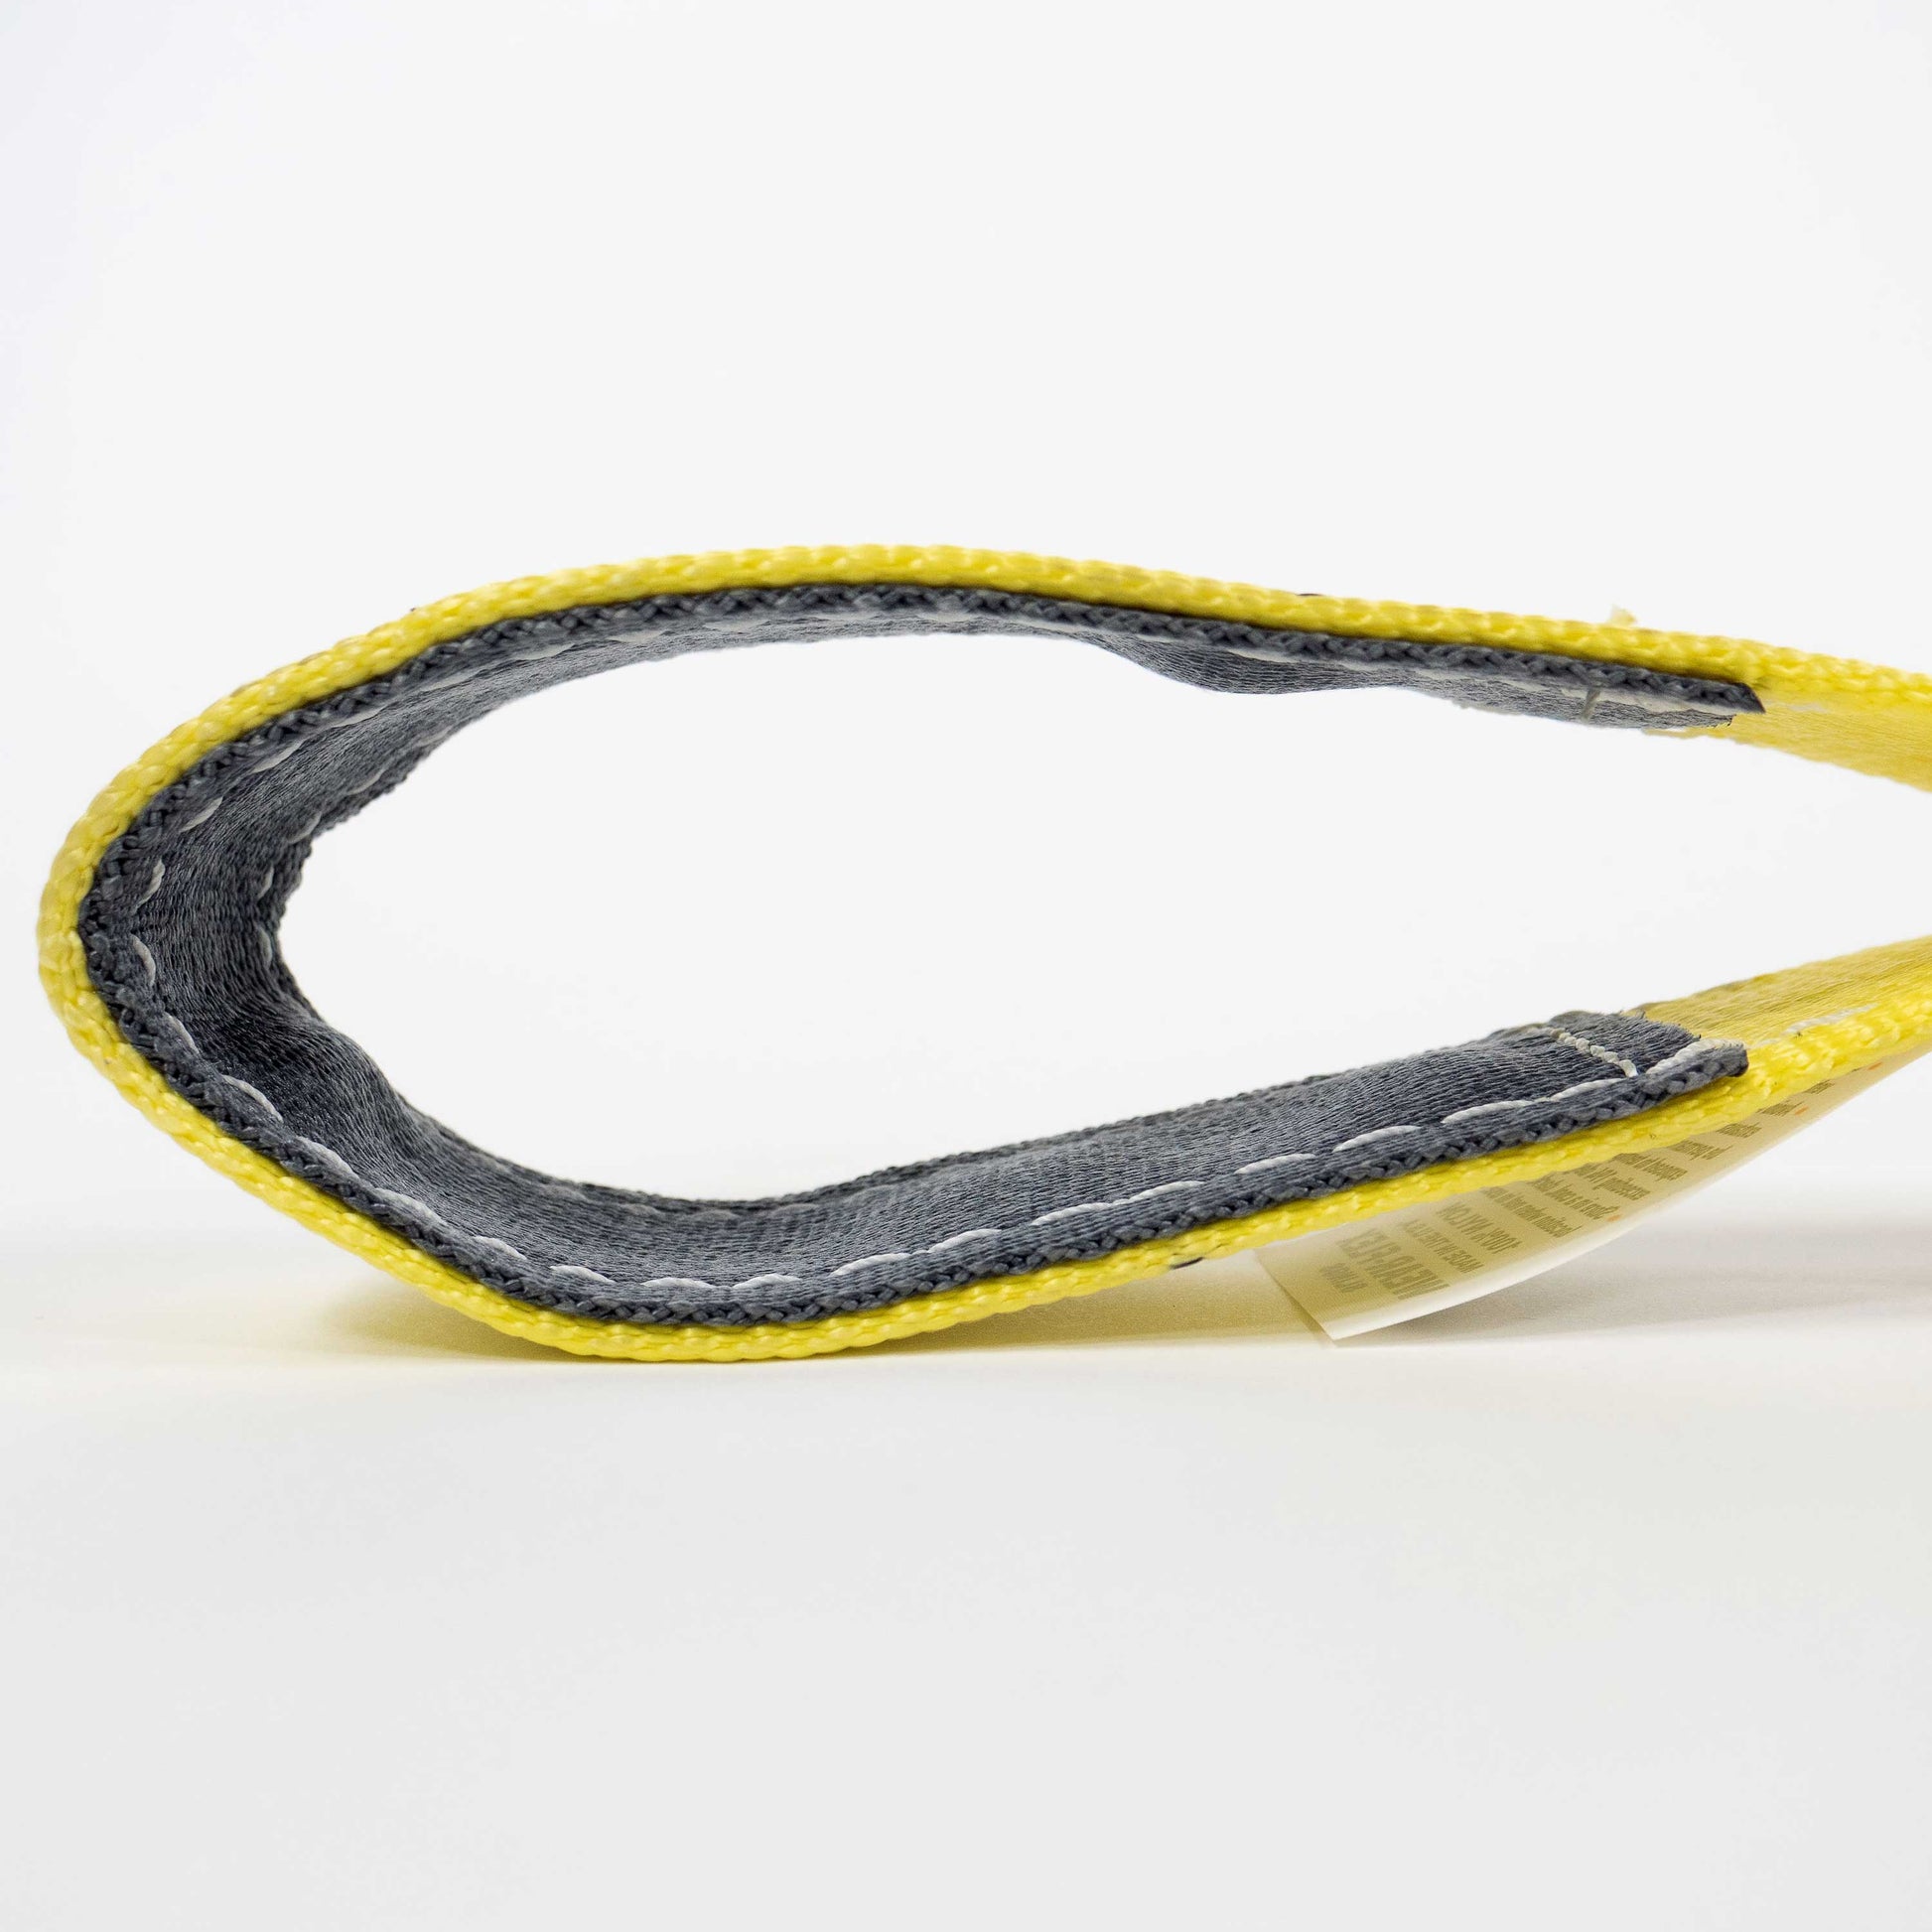 2 x 20' Recovery Strap with Cordura Eyes - 2 Ply